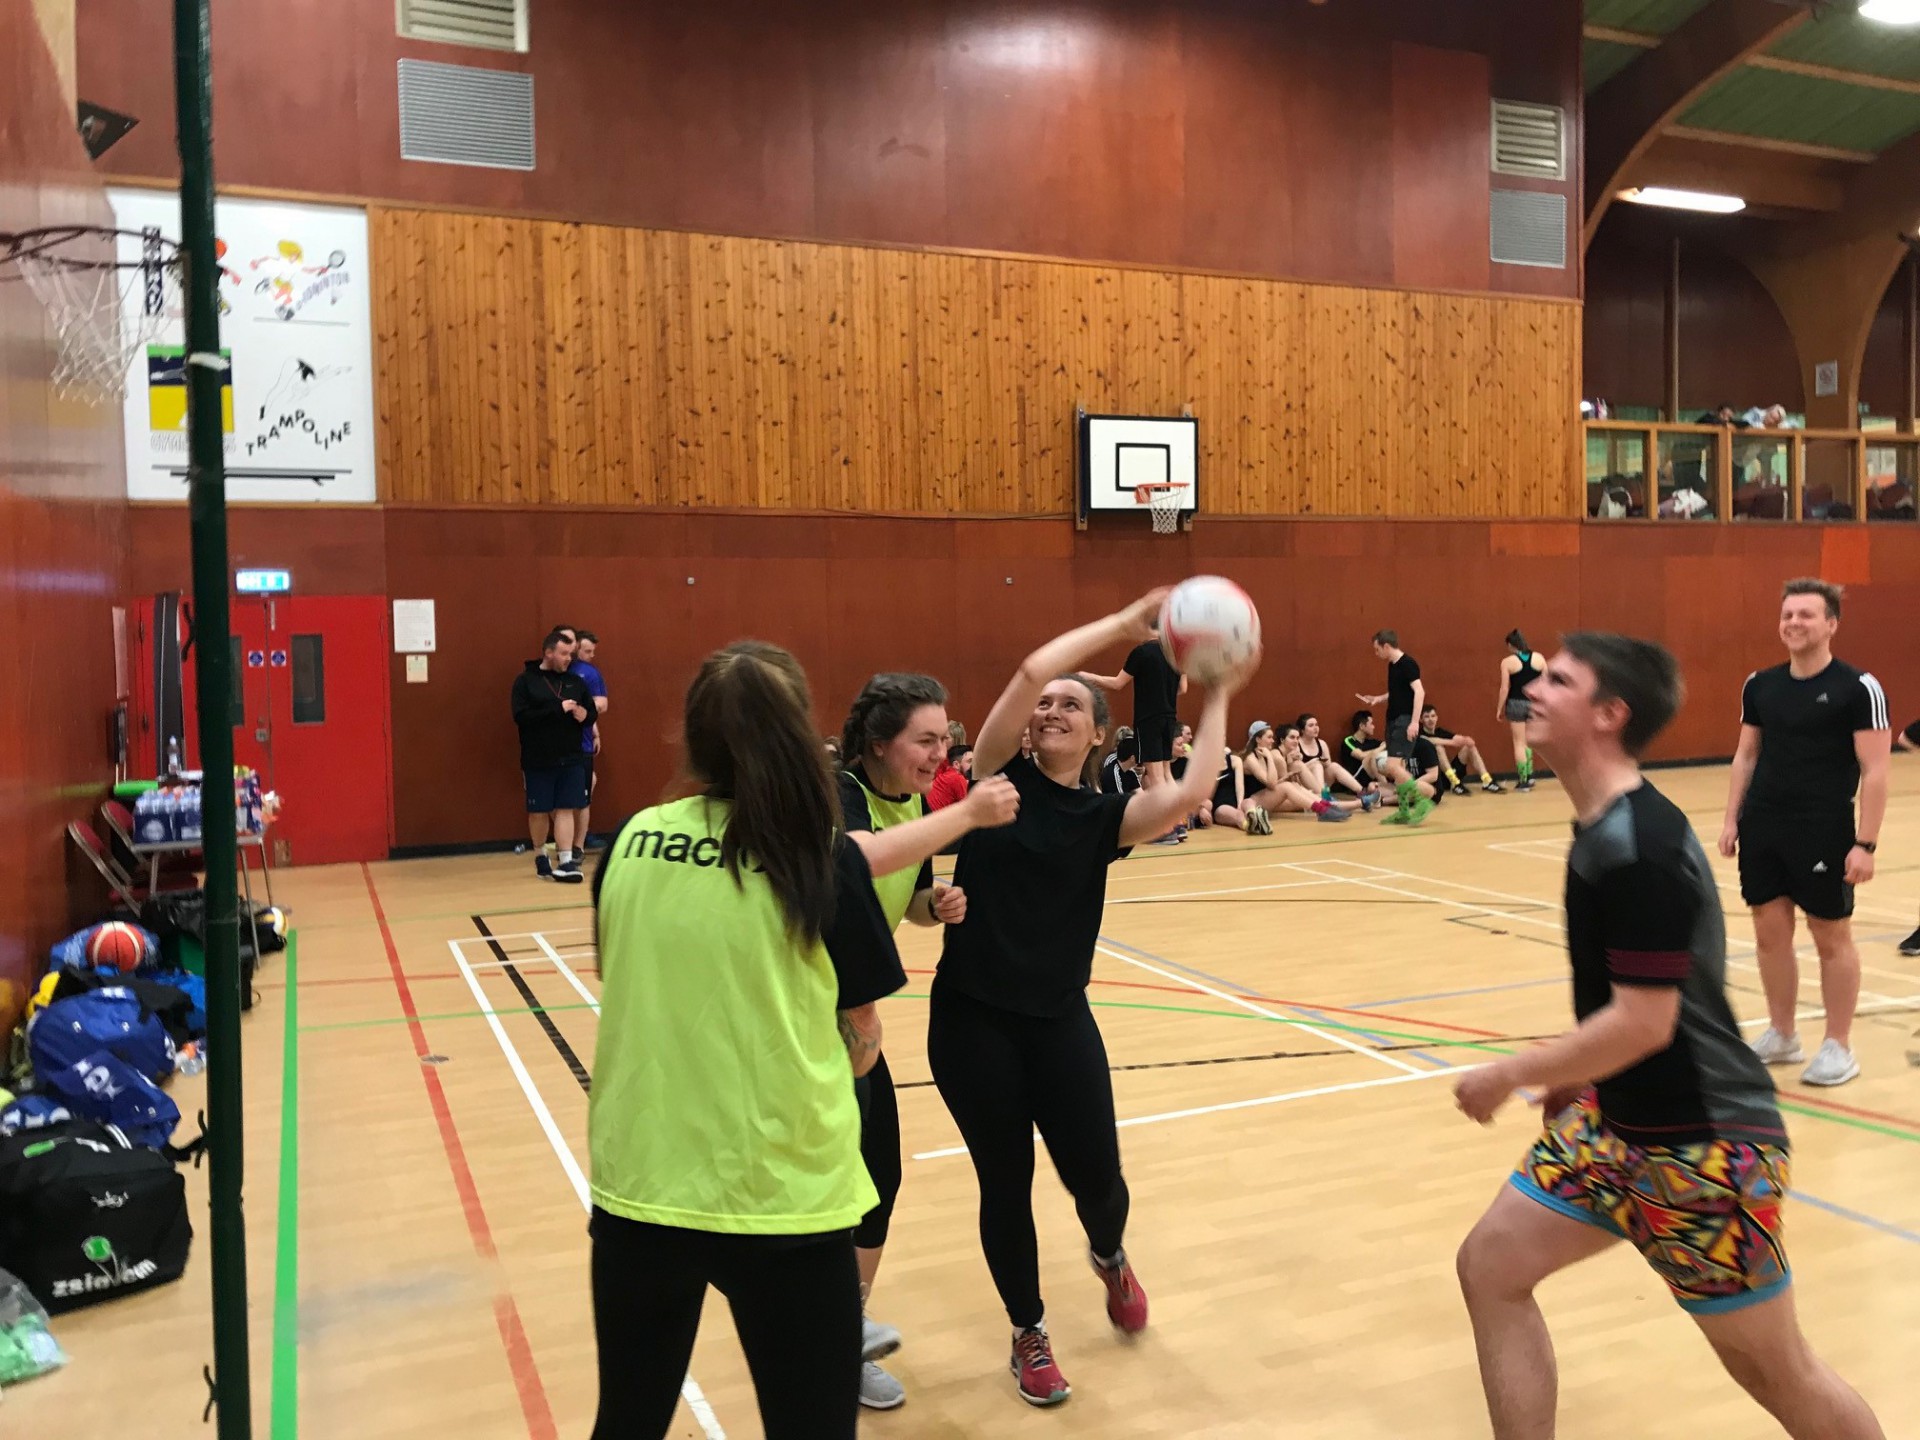 Students have a ball at charity Sport-Athlon